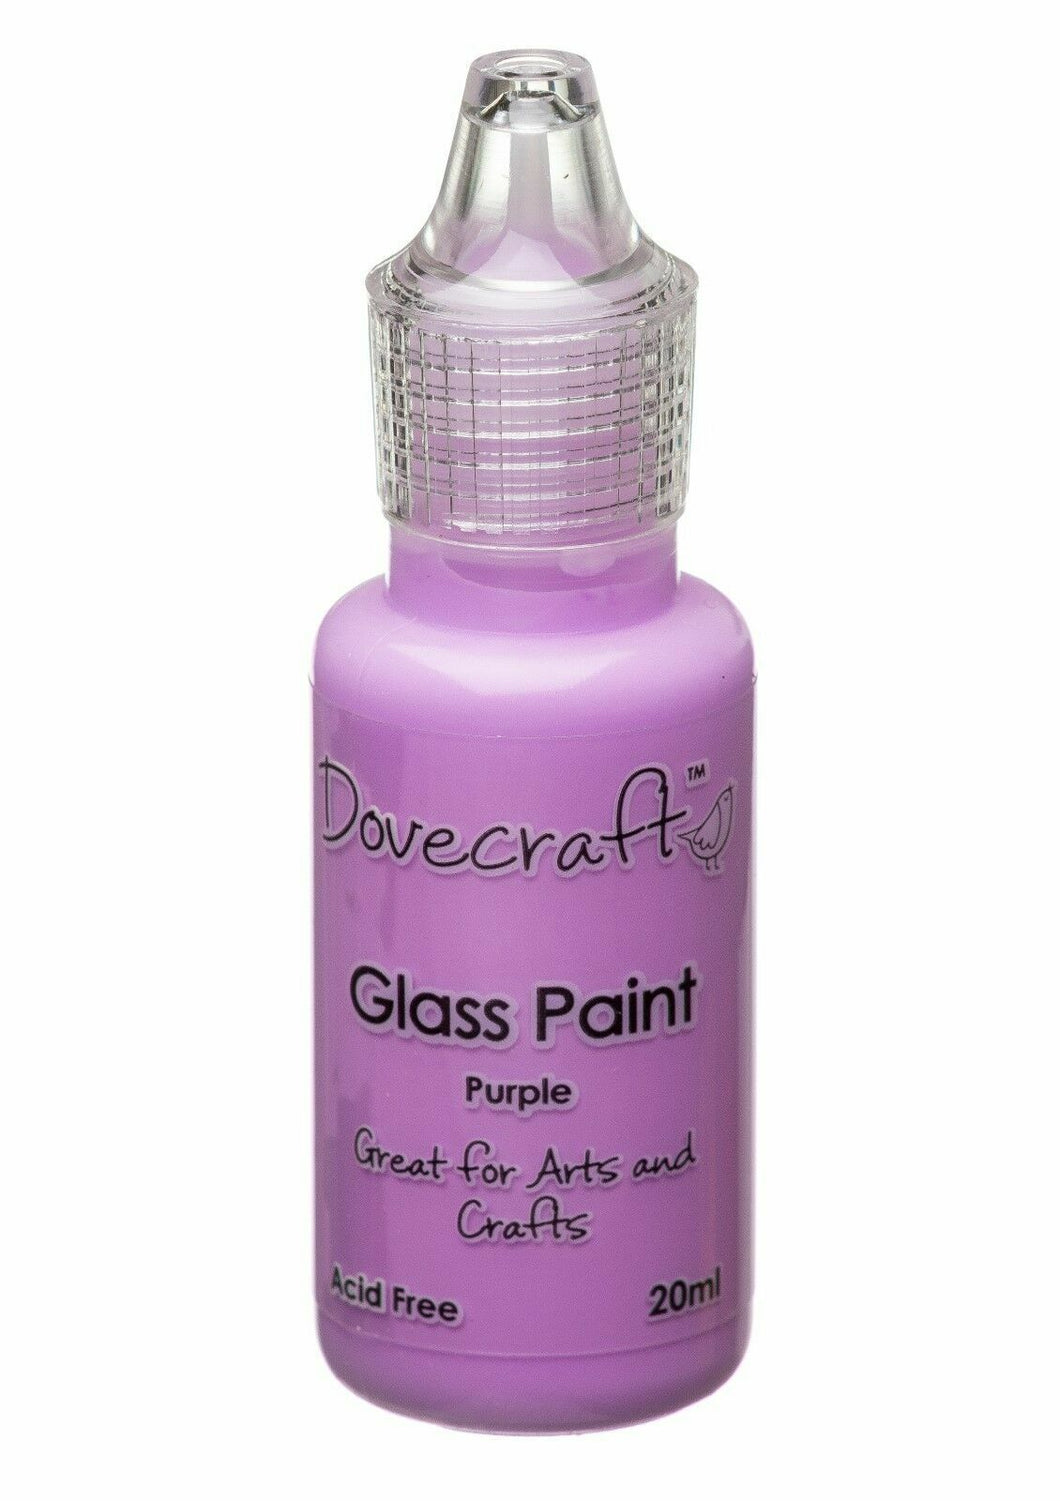 Dovecraft - Glass Paint - Easy Application - 20ml - Purple